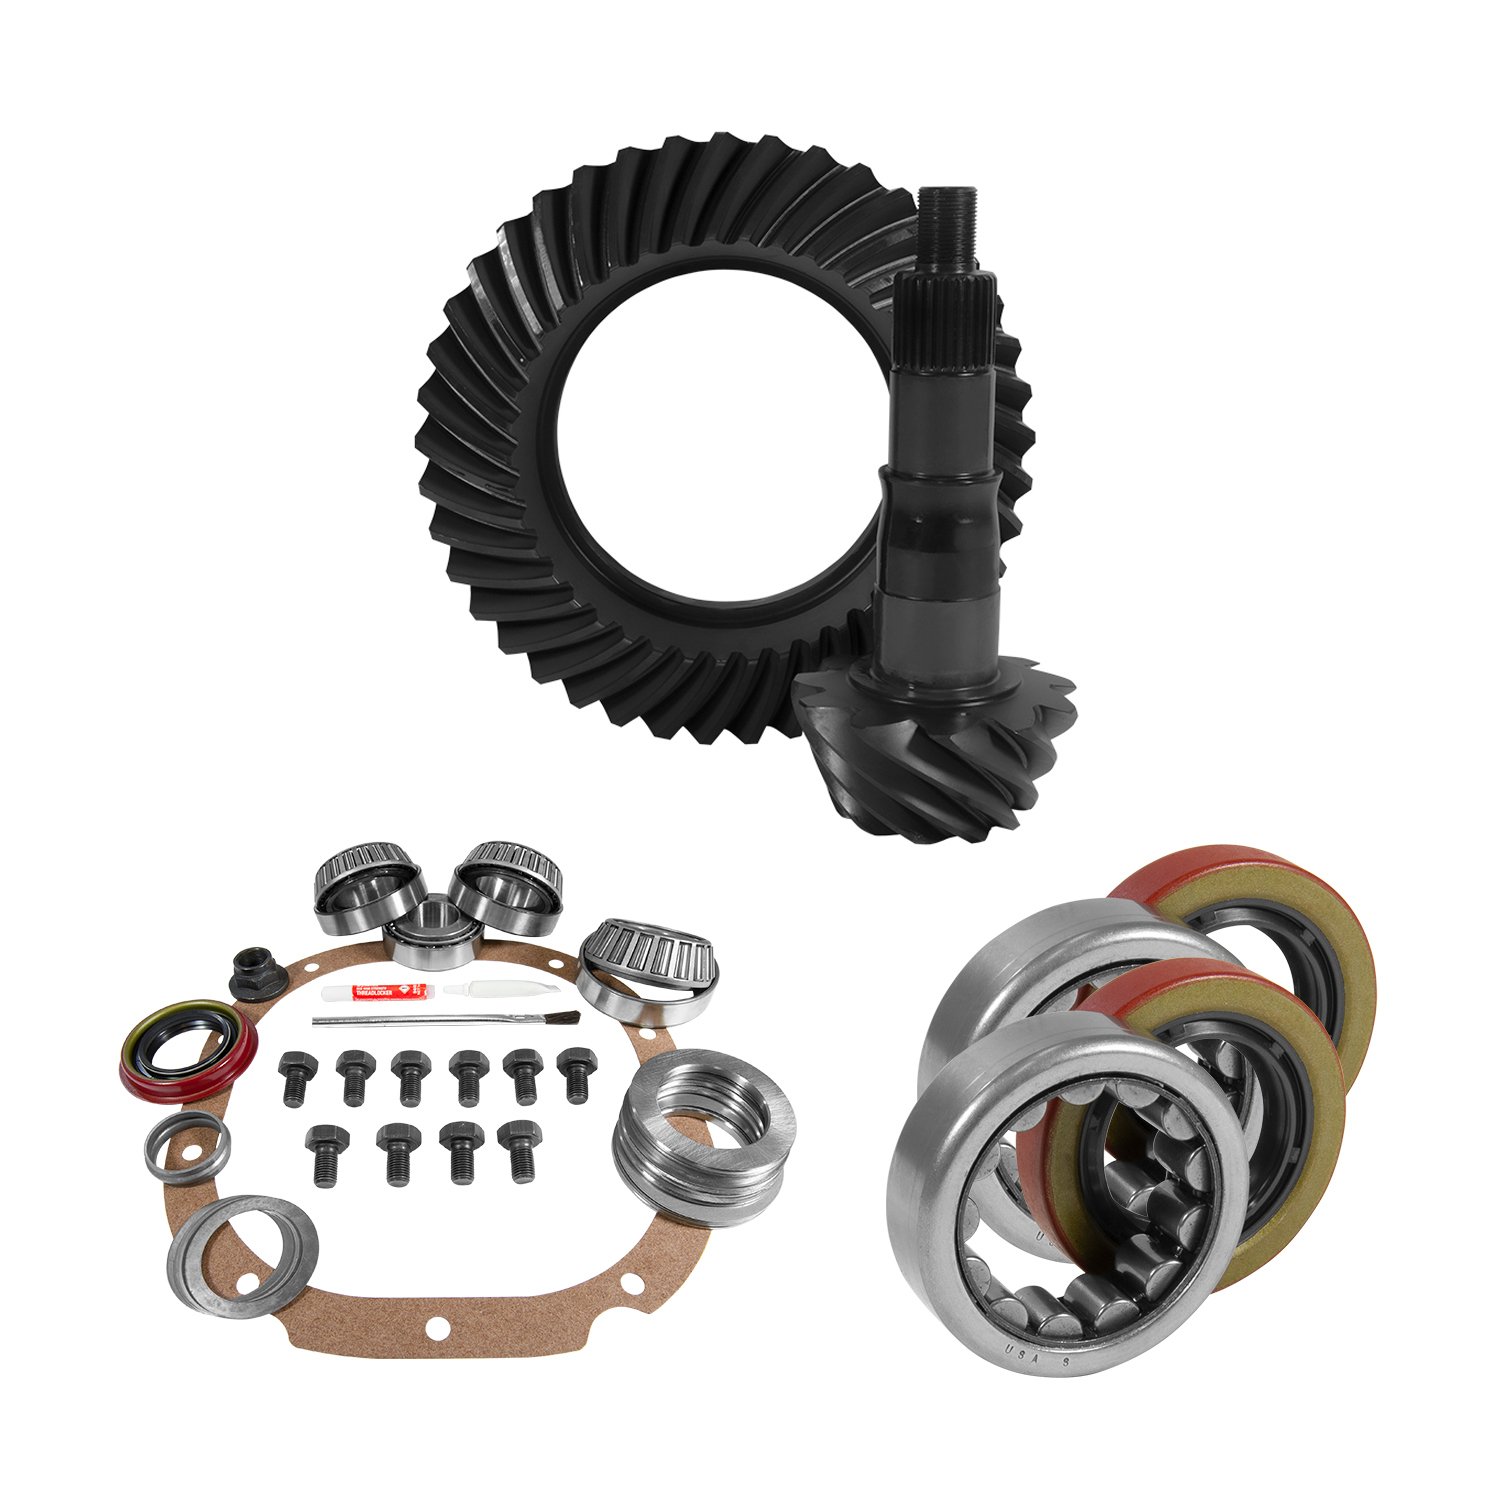 USA Standard 10670 8.8 in. Ford 3.27 Rear Ring & Pinion Install Kit, 2.25 in. Od Axle Bearings & Seals